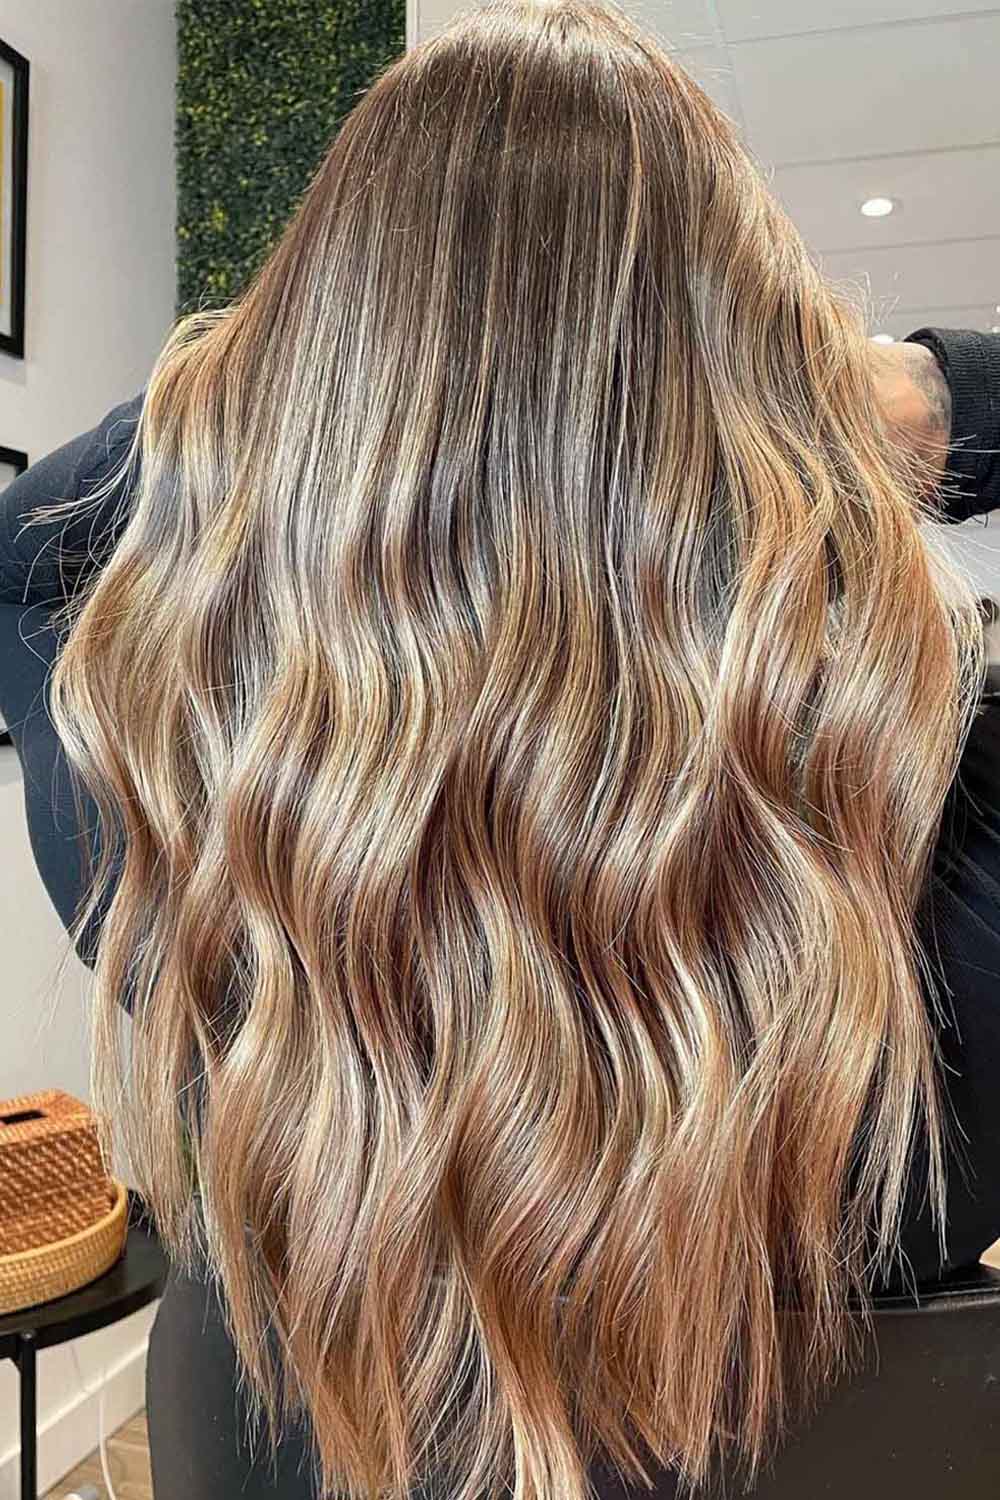 Caramel Highlights with Dark Roots